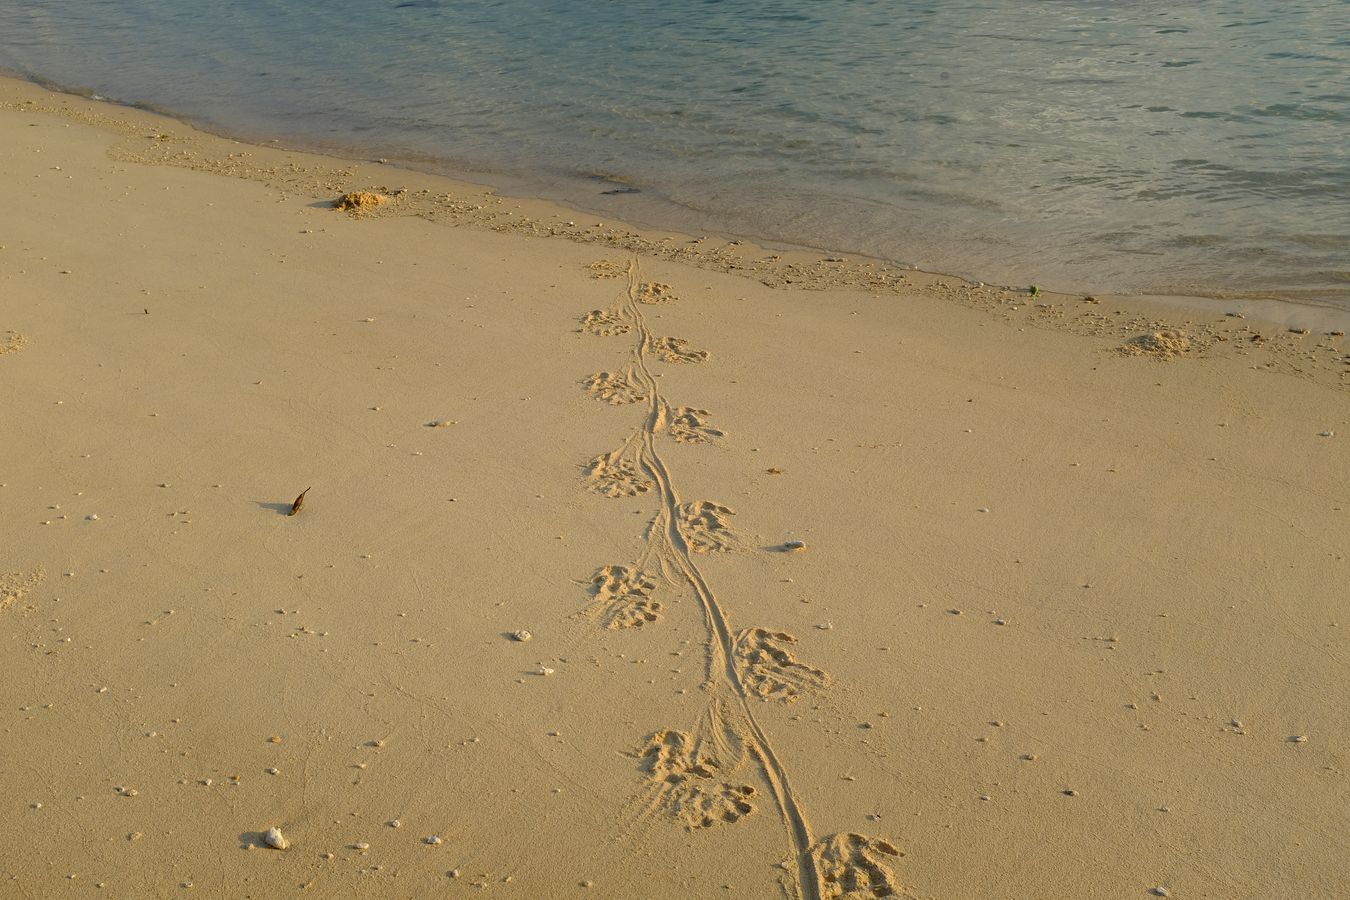 Footprints from the sea to the beach of water monitor lizard.